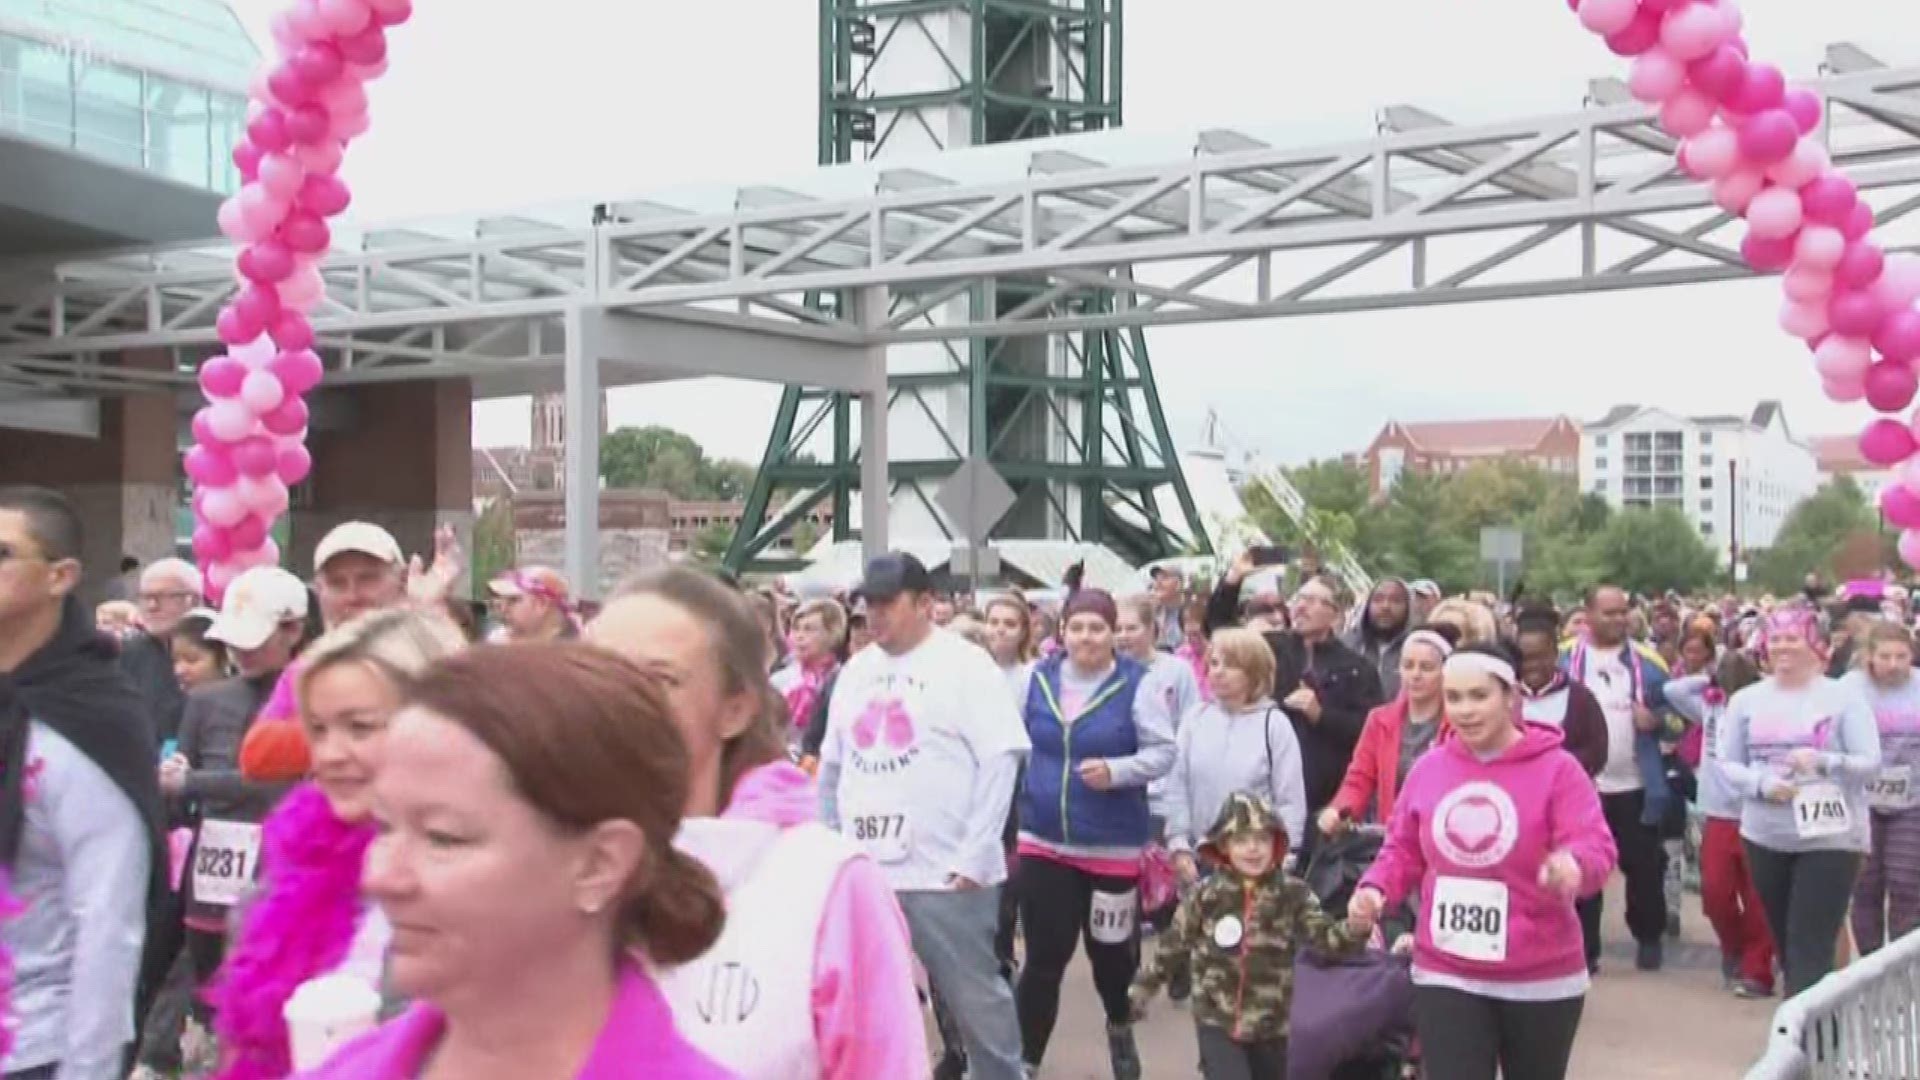 The Susan G Komen Race for the Cure kicked off this morning, and hundreds of walkers, runners and supporters showed up to raise awareness for breast cancer.